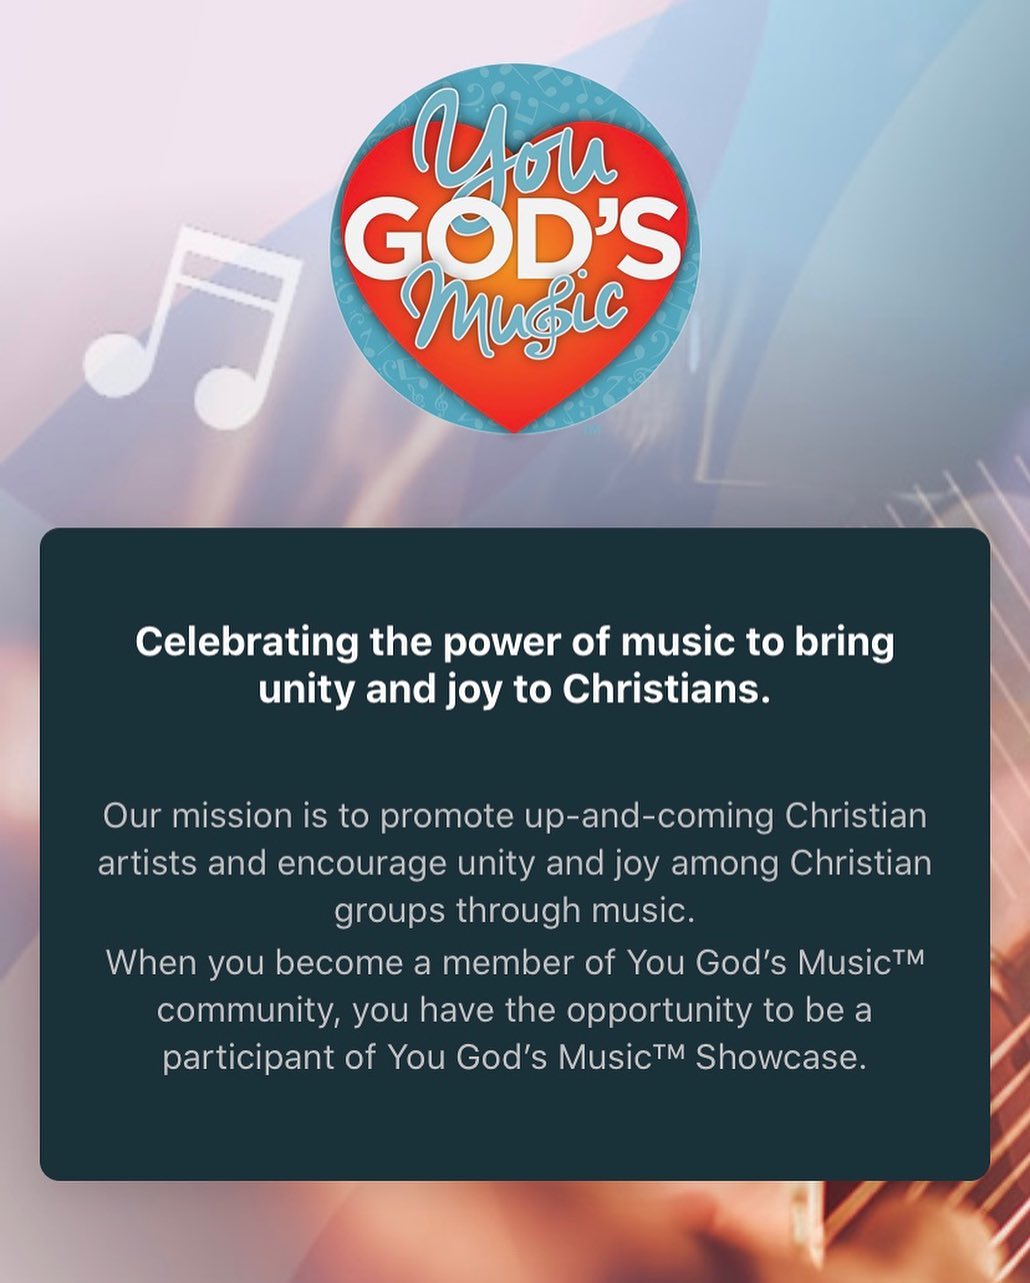 You God’s Music is celebrating the power of music to bring unity and joy to Christians.